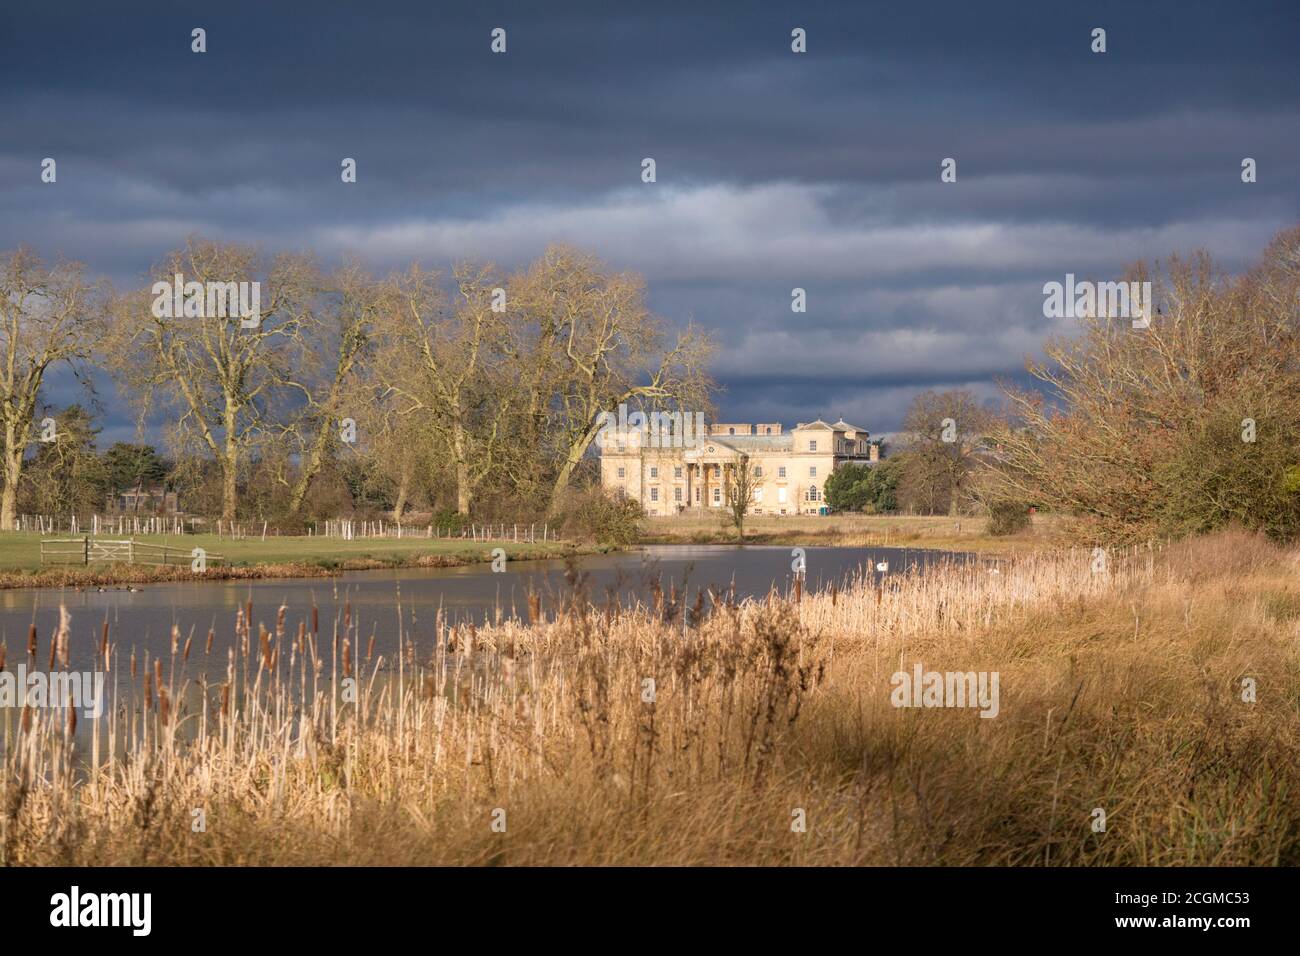 Wintertime at Croome park, Croome Court, Worcestershire, England, Uk Stock Photo